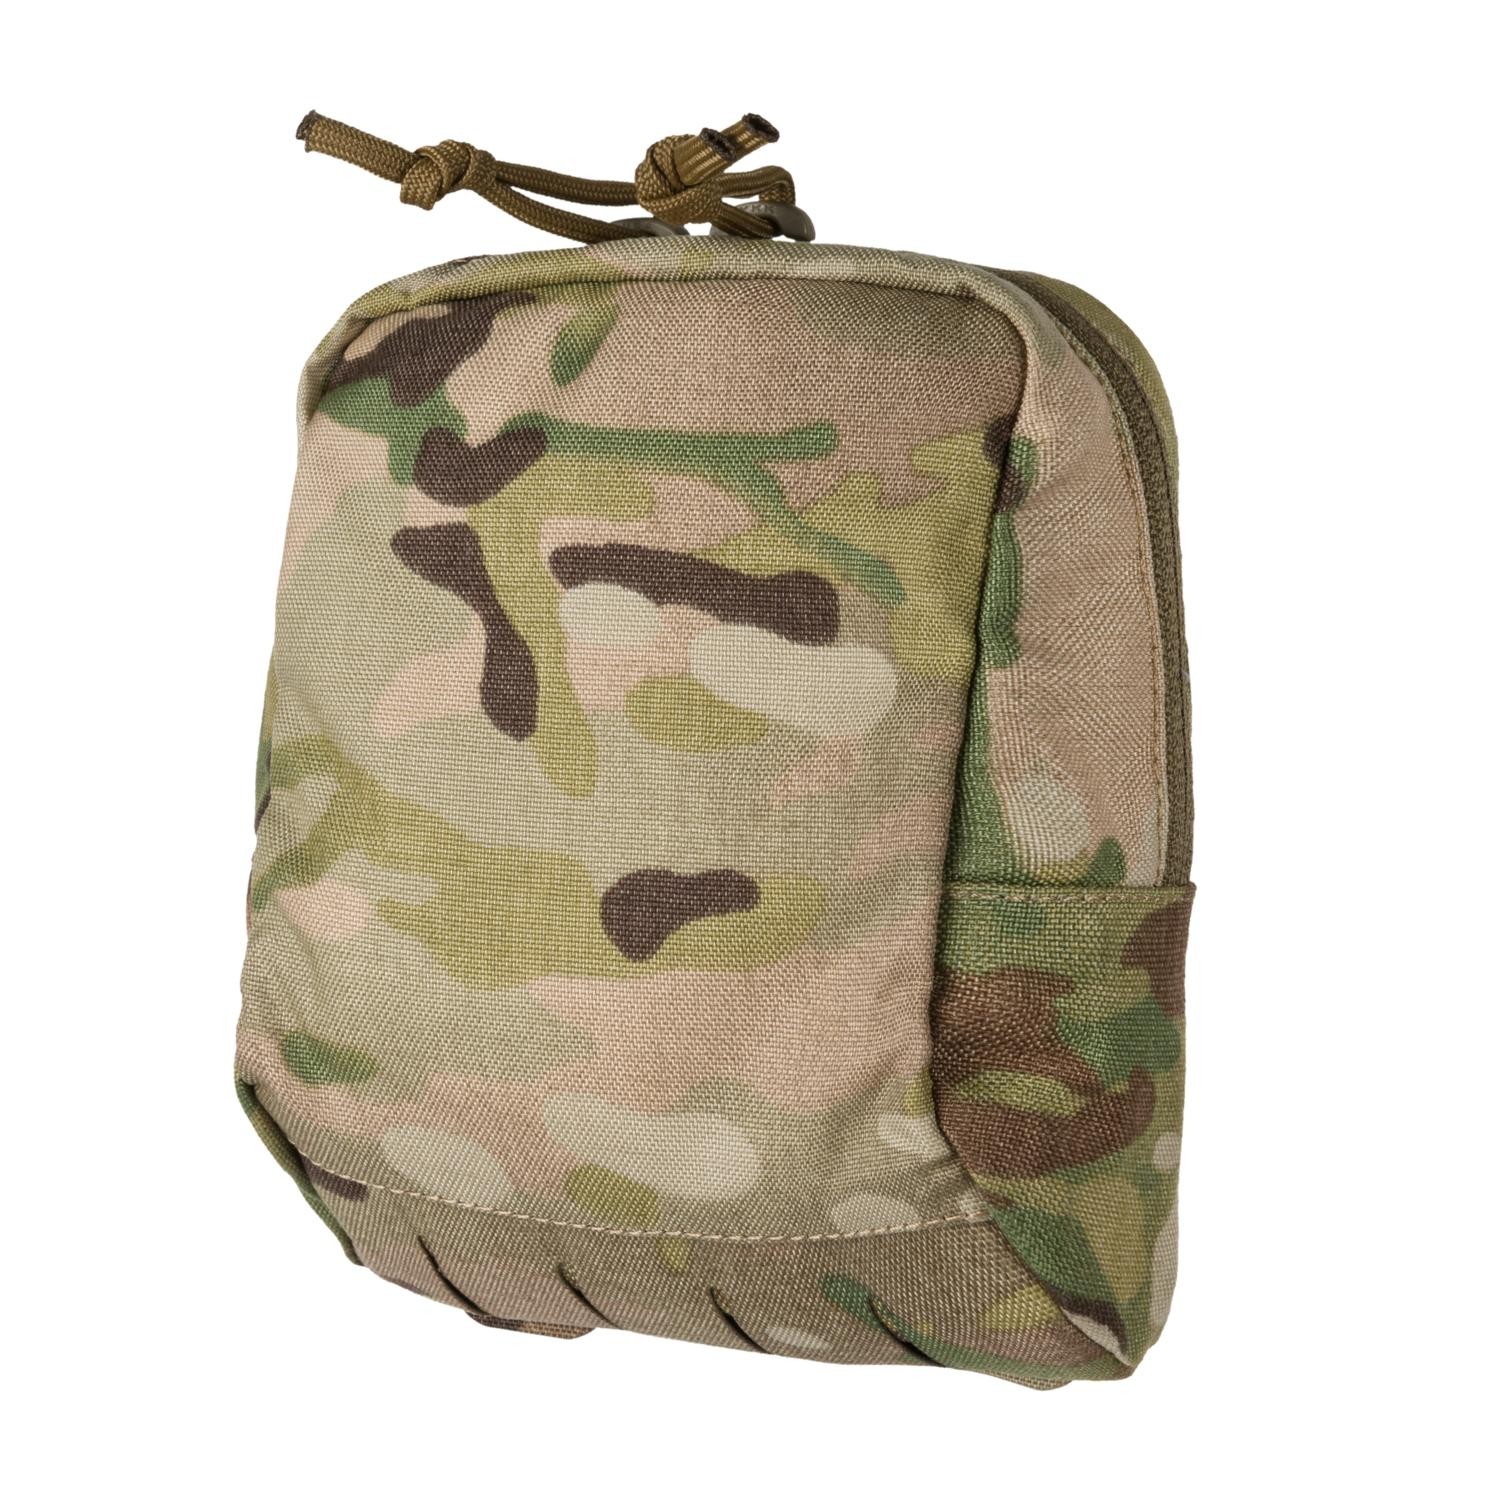 UTILITY POUCH SMALL - DIRECT ACTION